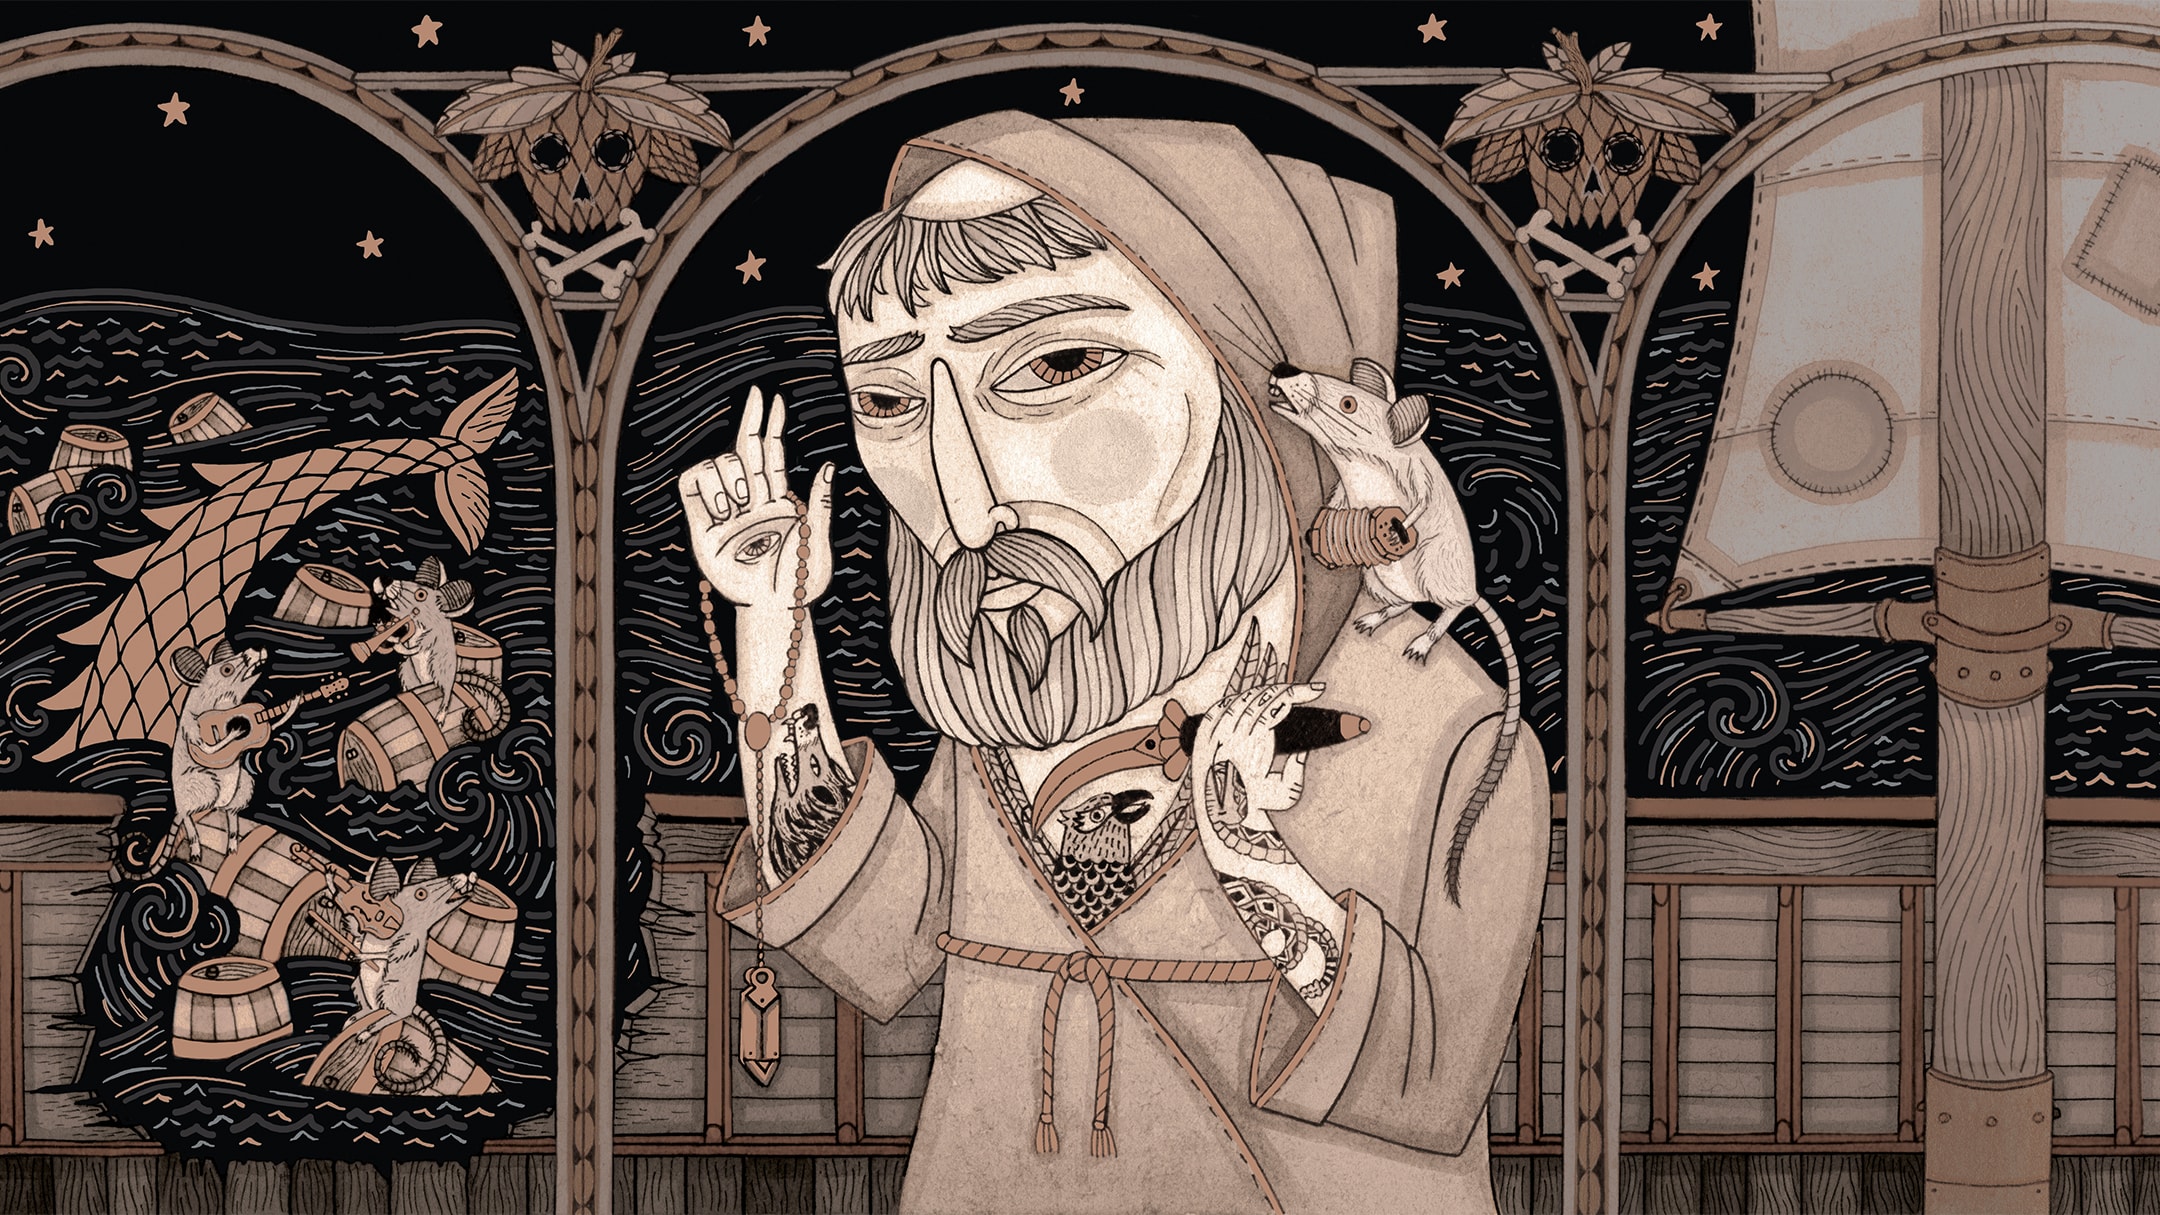 Illustrations used for Coppertail Beer Bottle Design and packaging. Monk featured on Unholy.